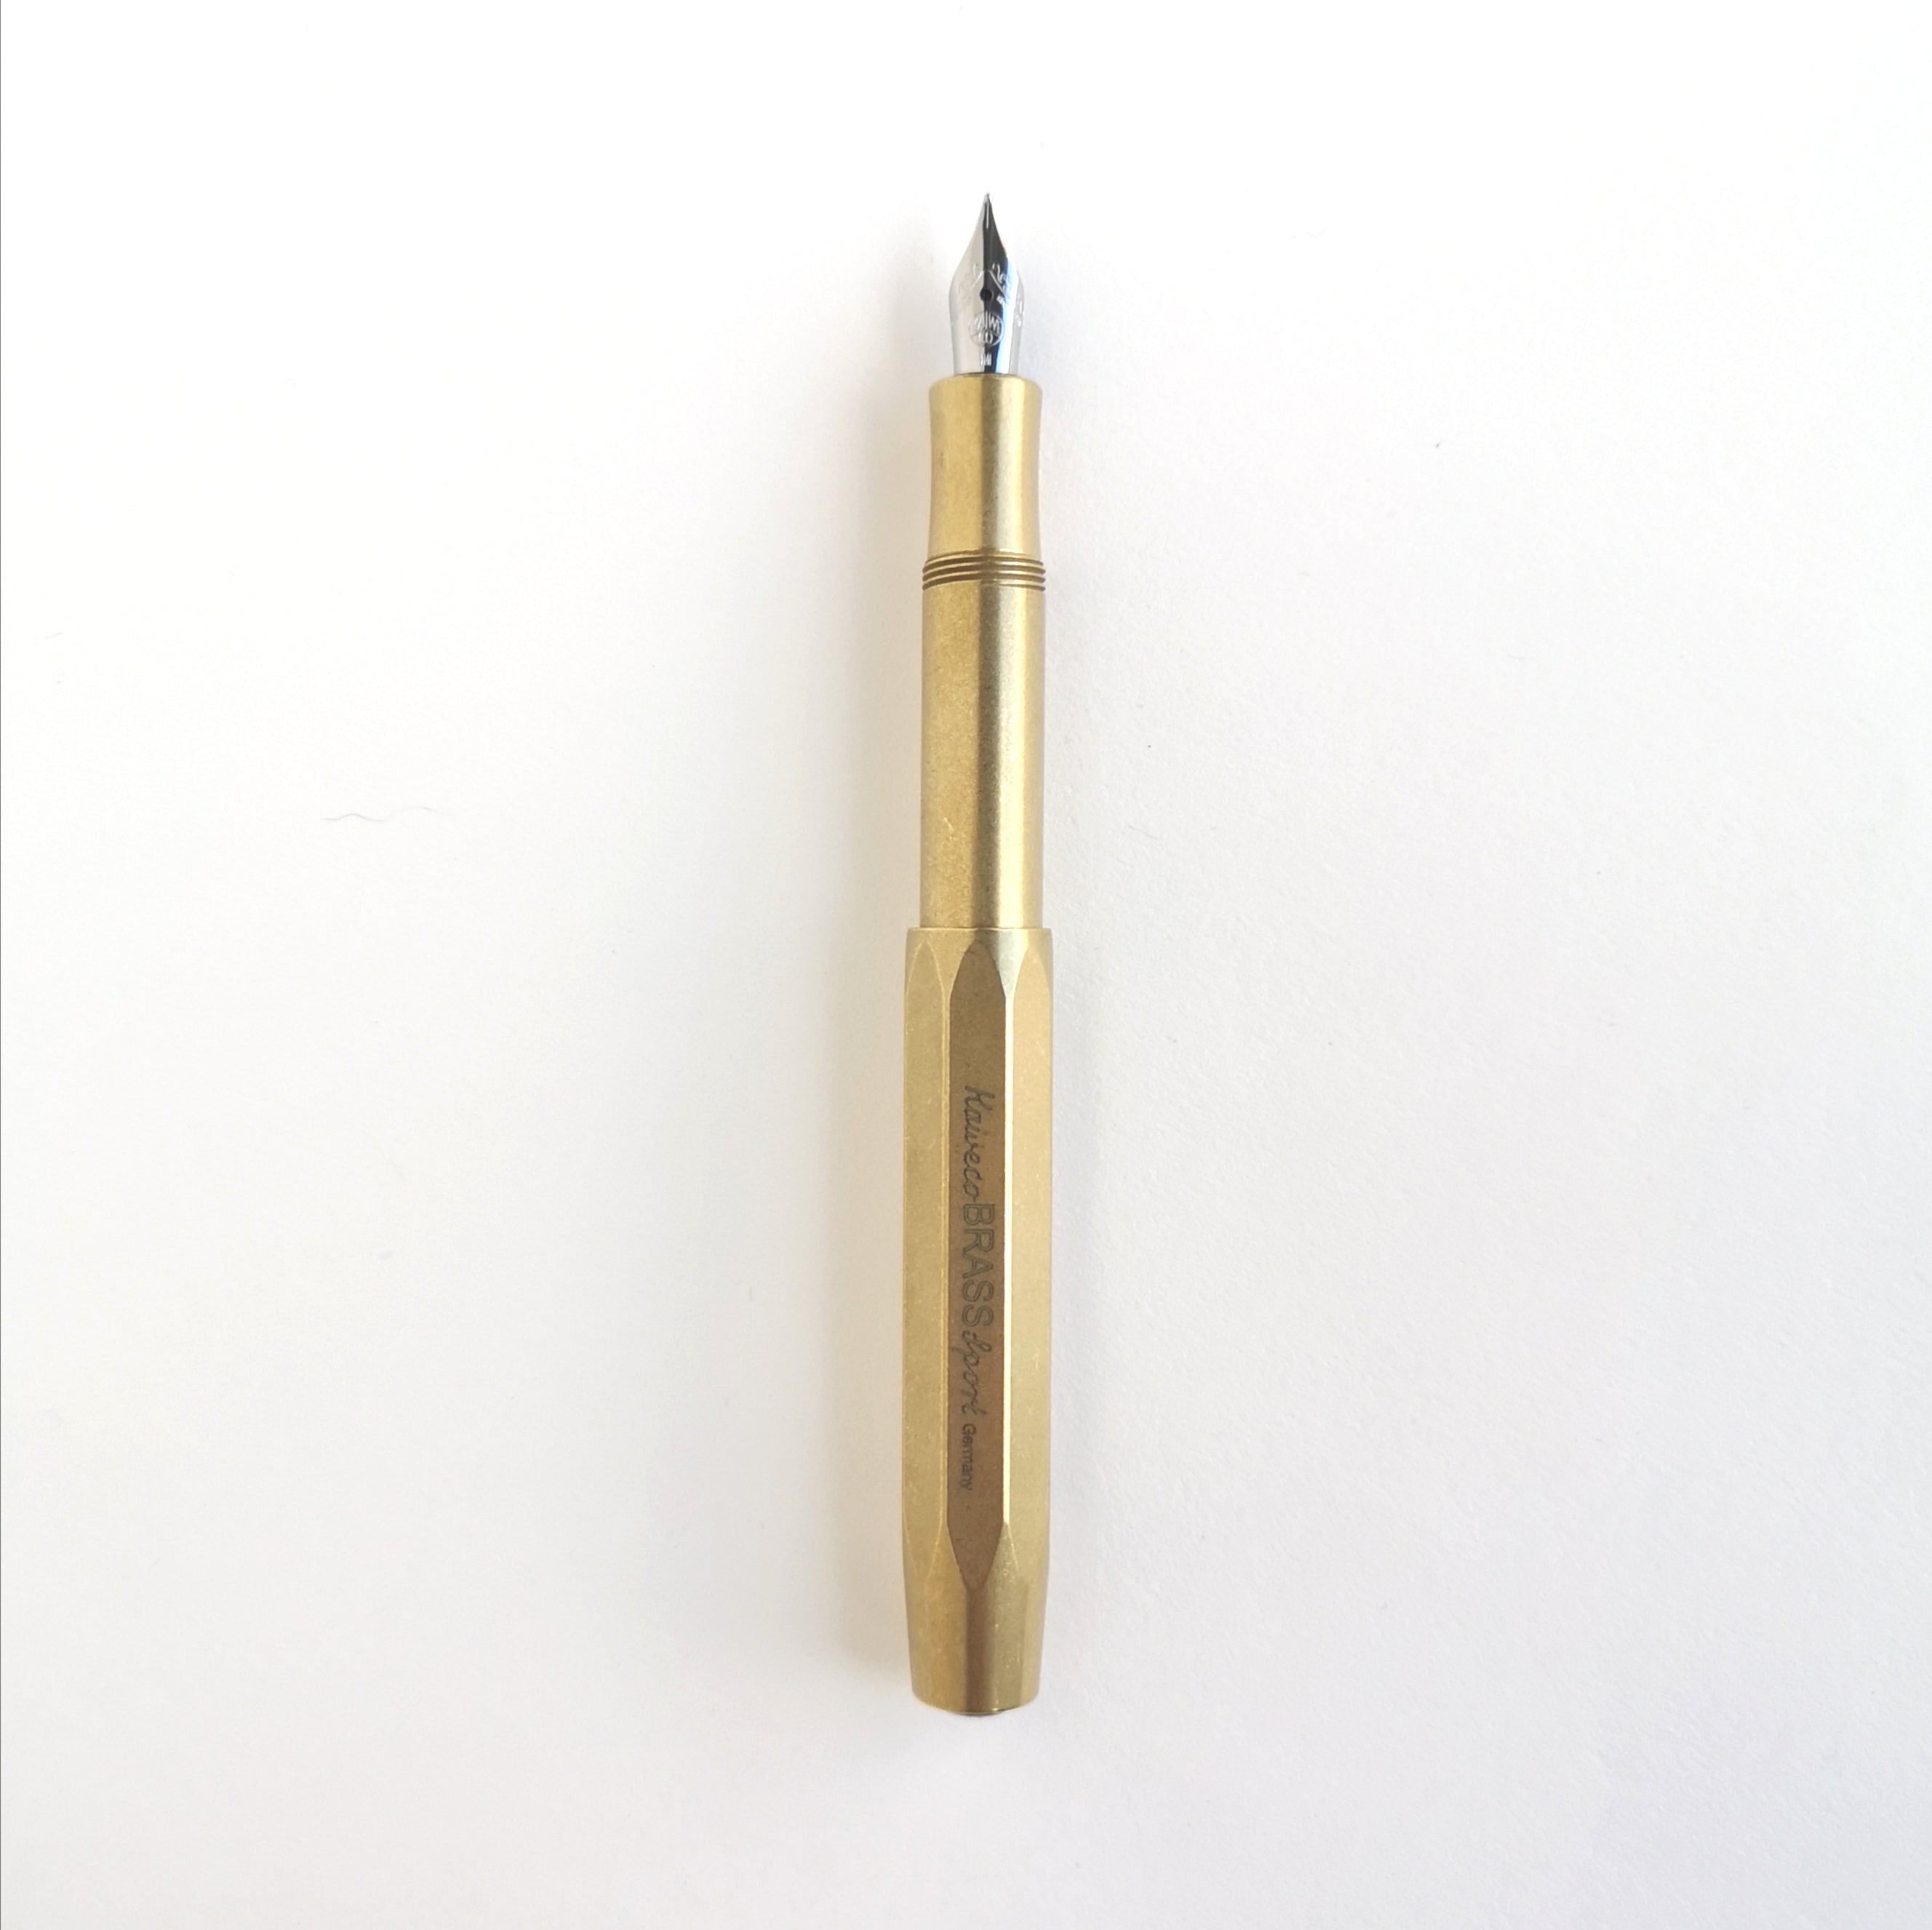 Brass Kaweco Sport Fountain Pen with cap posted